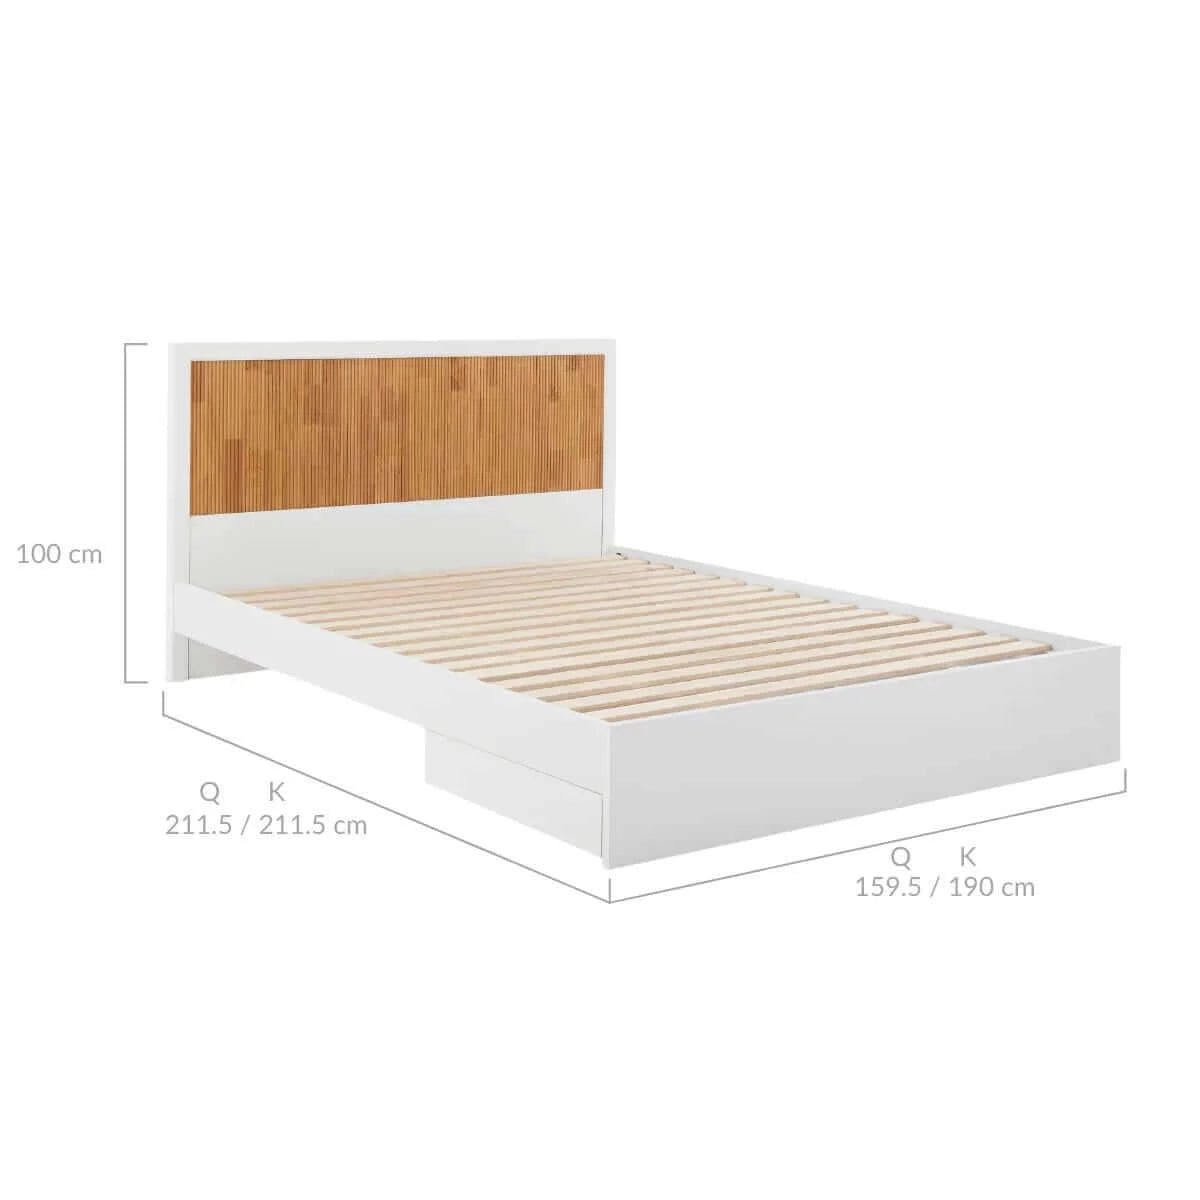 Buy tracey column bed frame with storage - king - upinteriors-Upinteriors